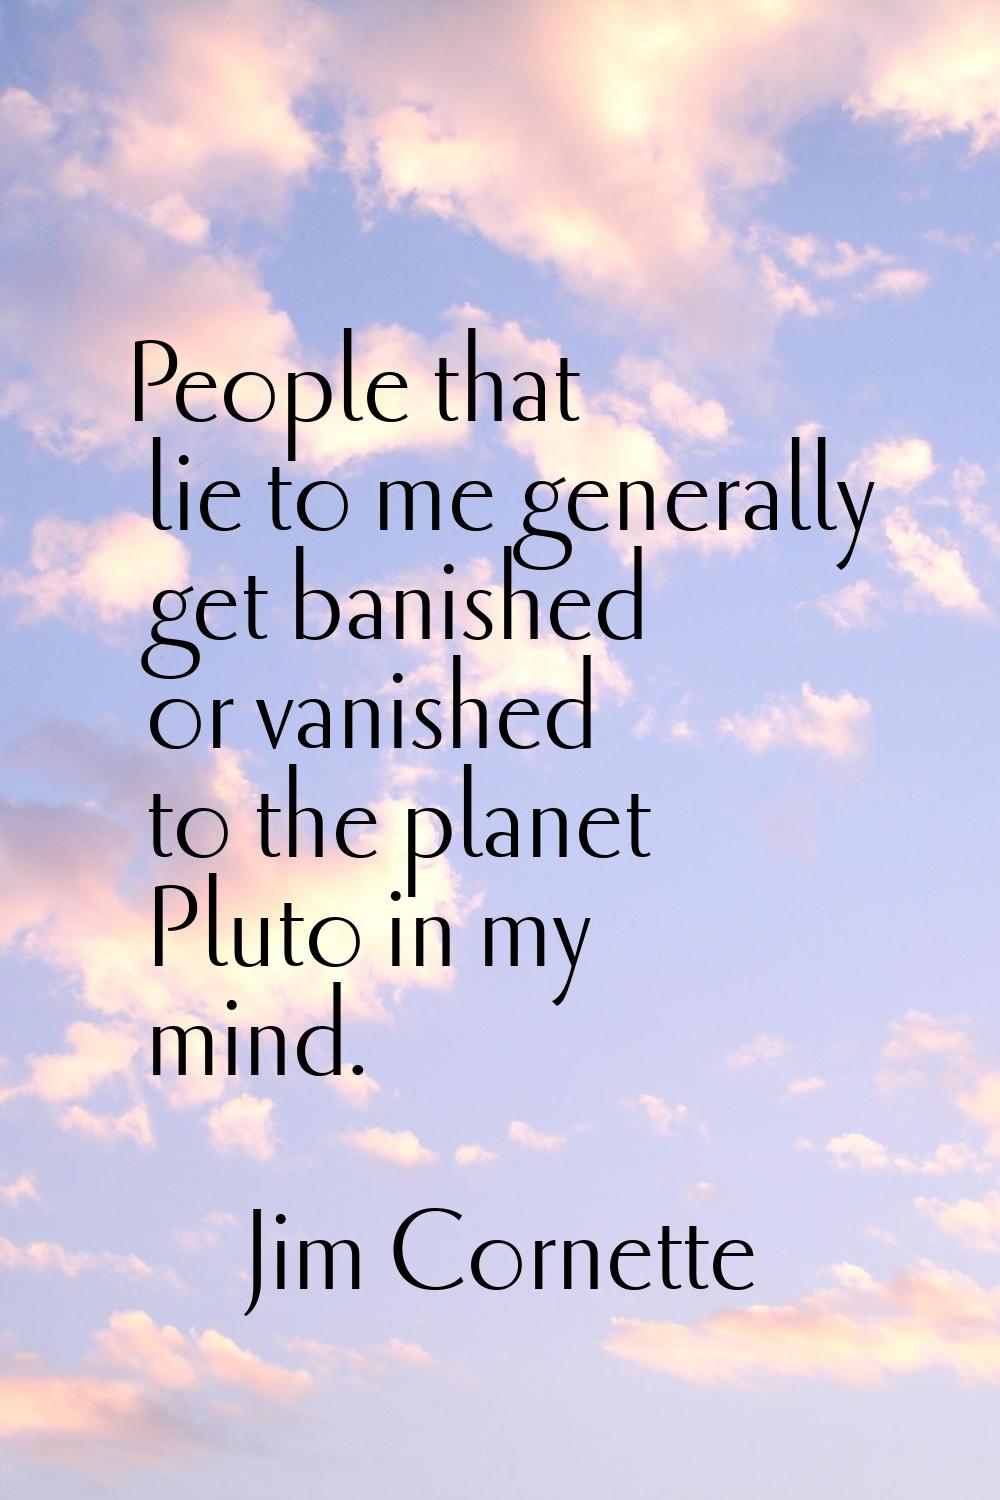 People that lie to me generally get banished or vanished to the planet Pluto in my mind.